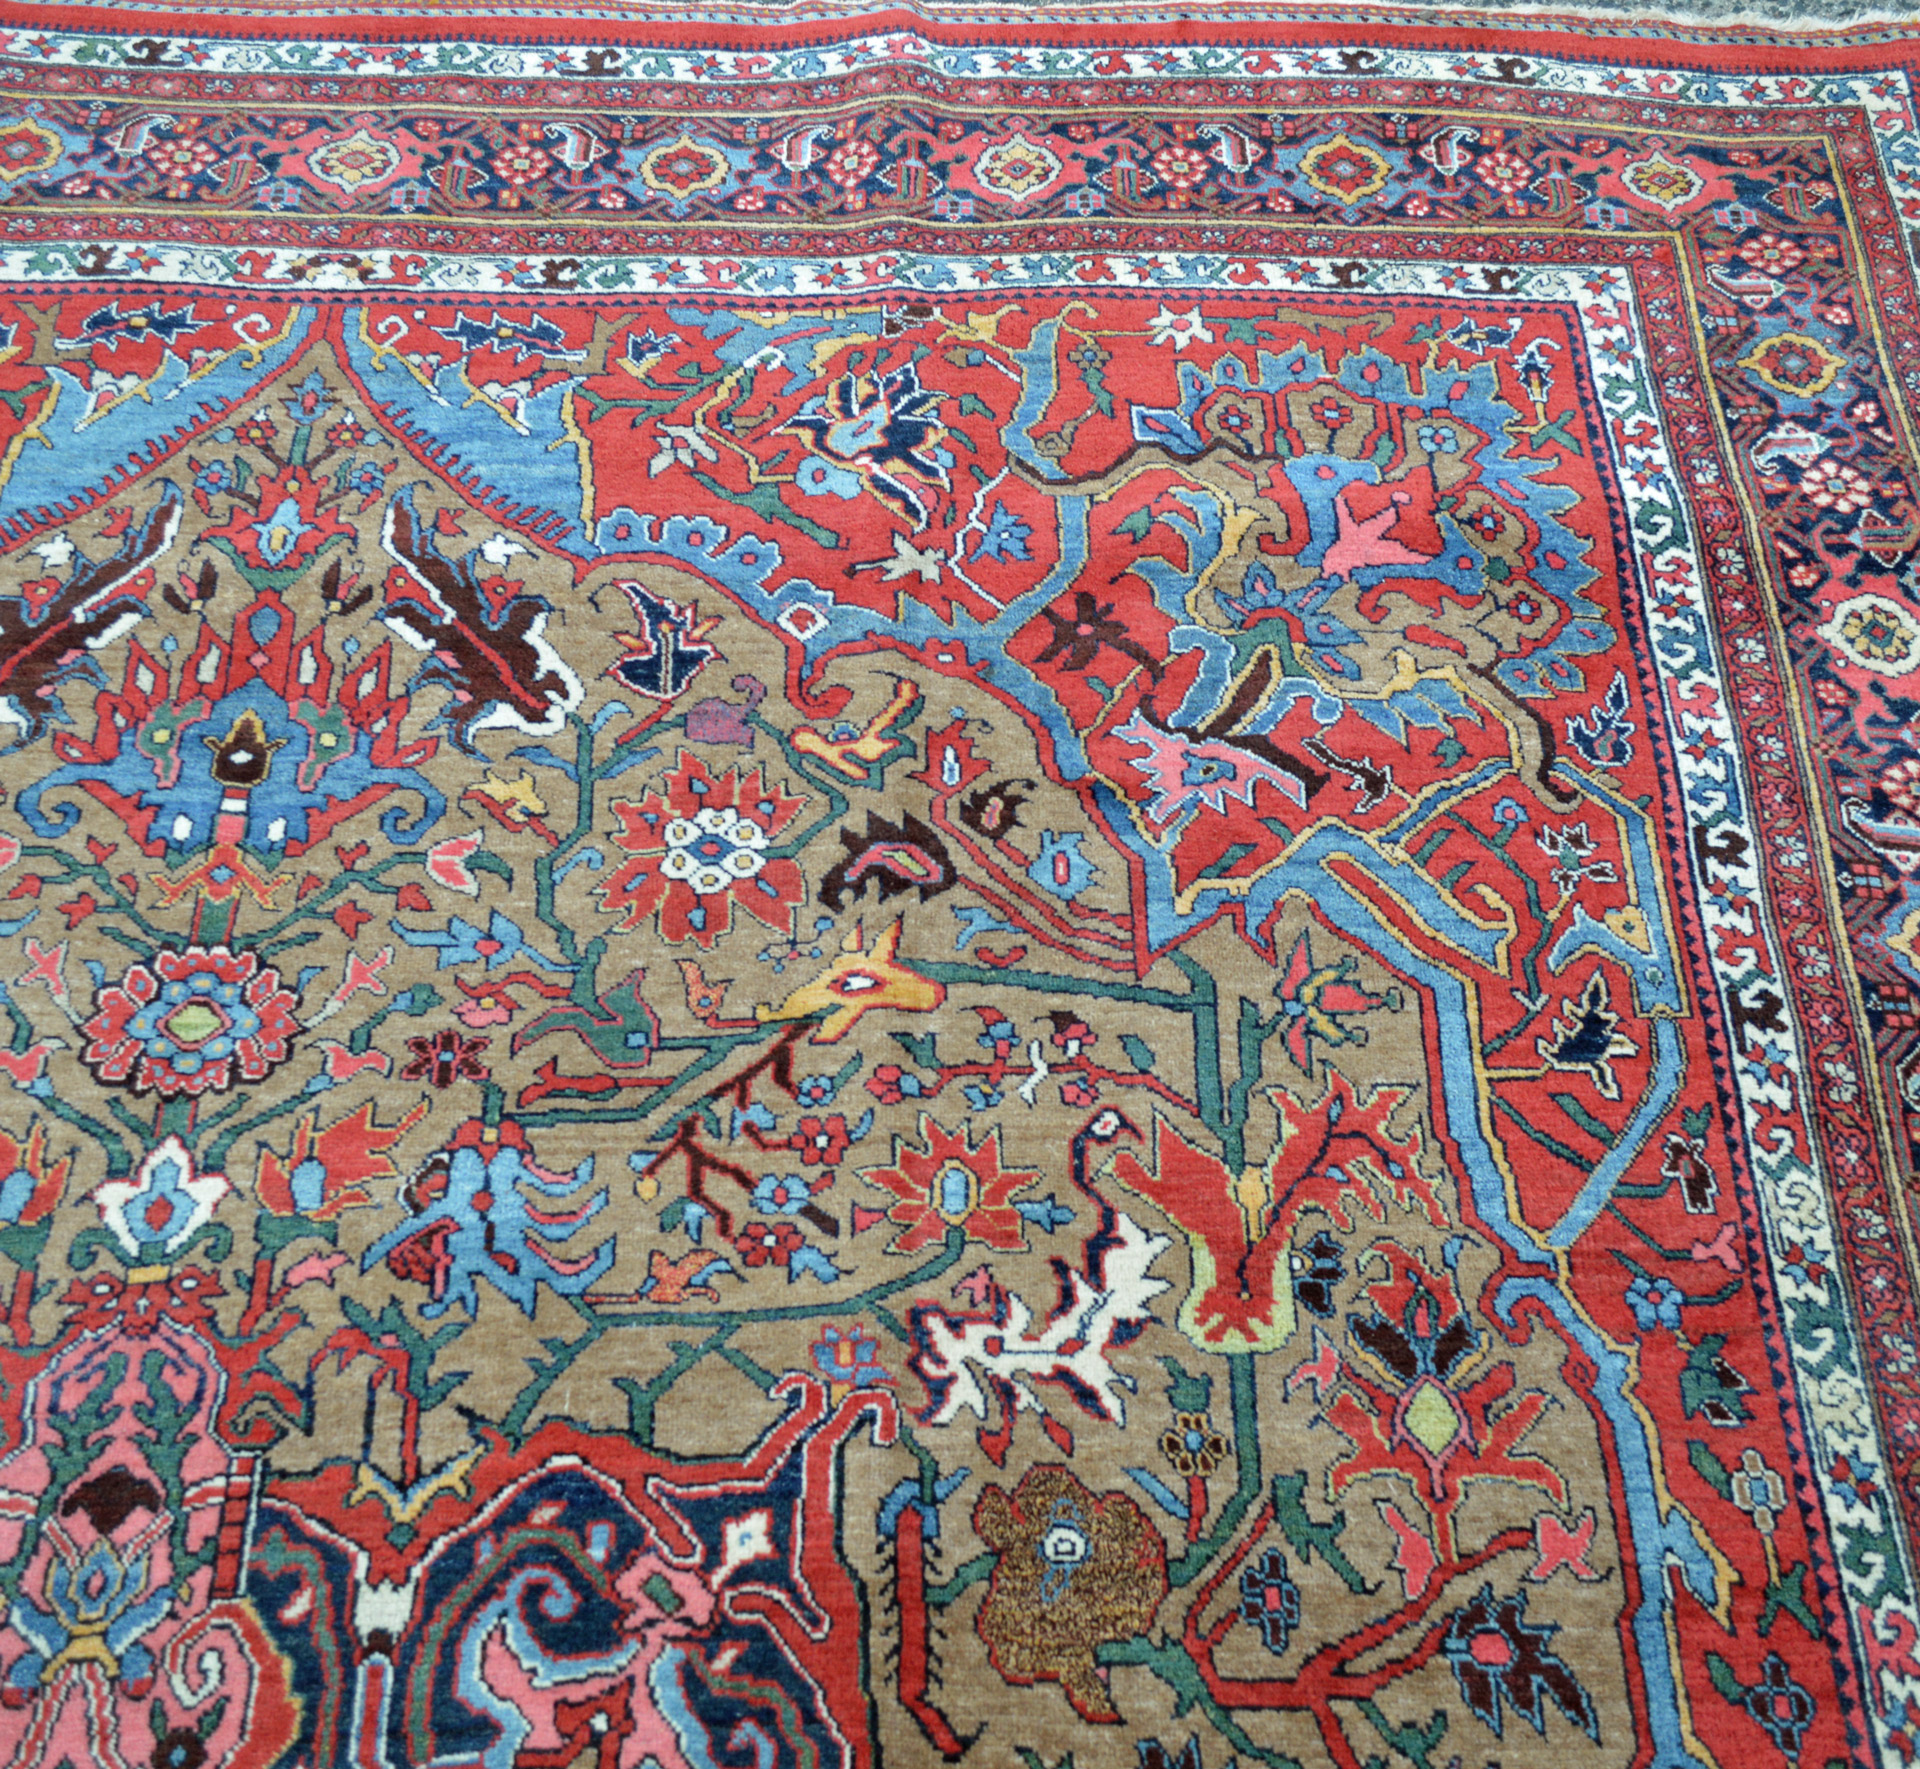 Field, spandrel and border detail from an antique Persian Bidjar carpet, circa 1900, with stylized animals and floral forms on a camel color field, red spandrels and a navy border. Douglas Stock Gallery offers an excellent selection of antique Persian Bidjar rugs and room size Bidjar carpets. Antique rugs Boston,MA area